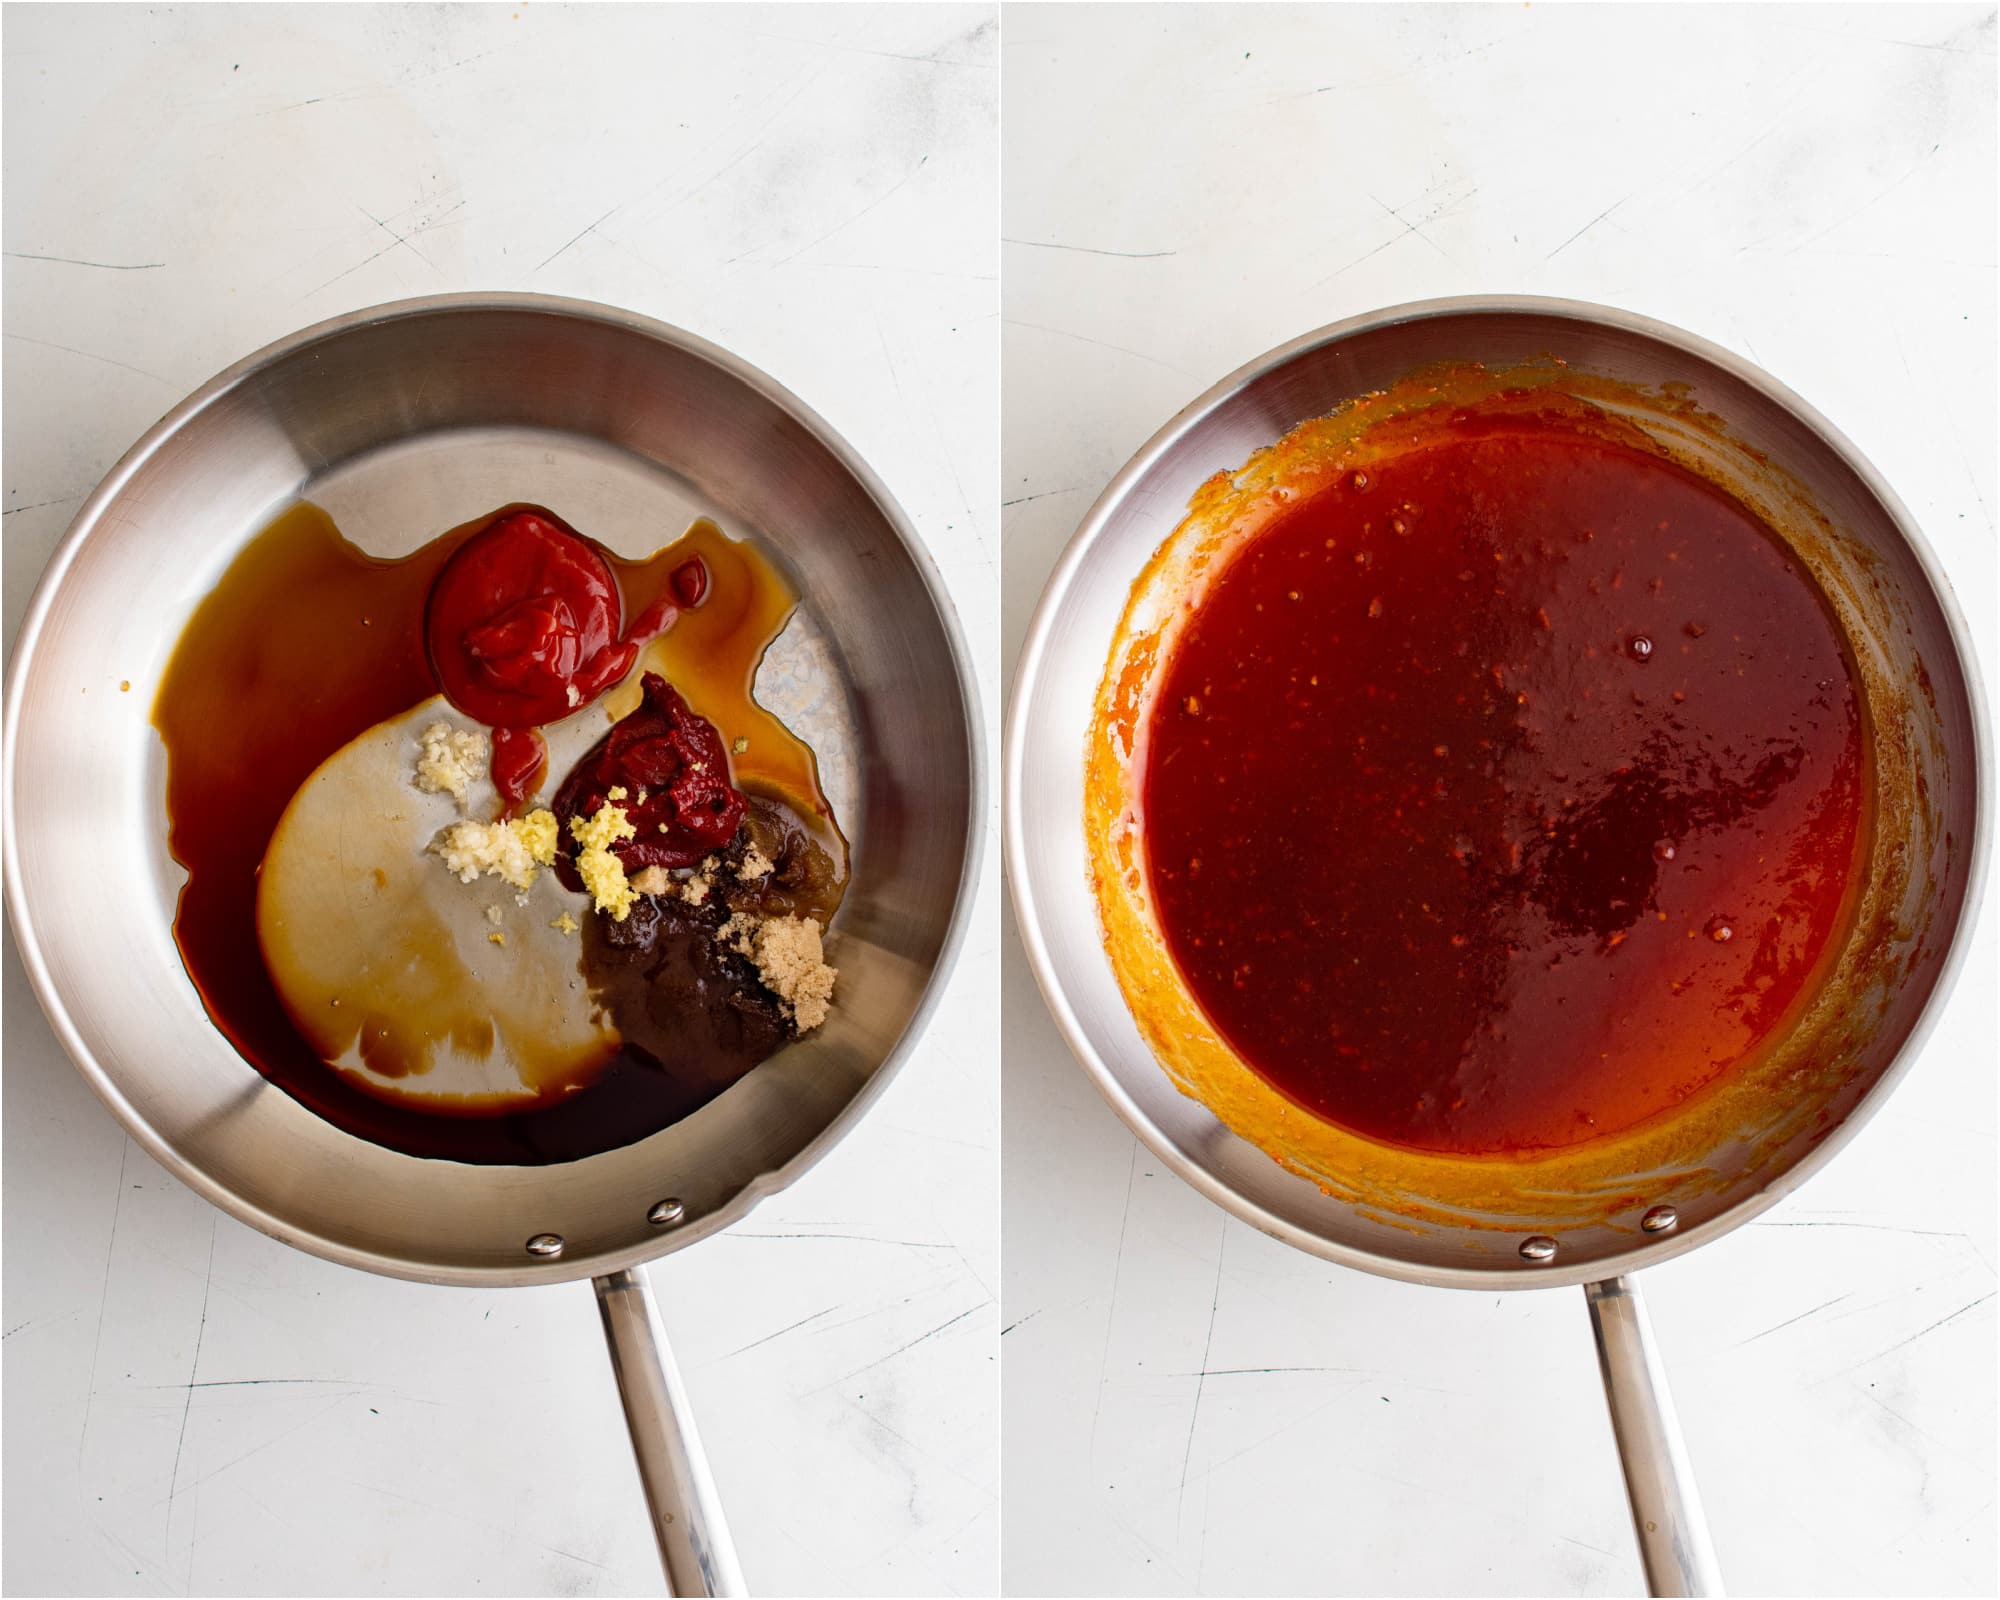 Two side-by-side images: the first image shows all of the ingredients for the homemade korean chili sauce in a large skillet; the second image shows a large skillet filled with thickened homemade korean chili sauce.